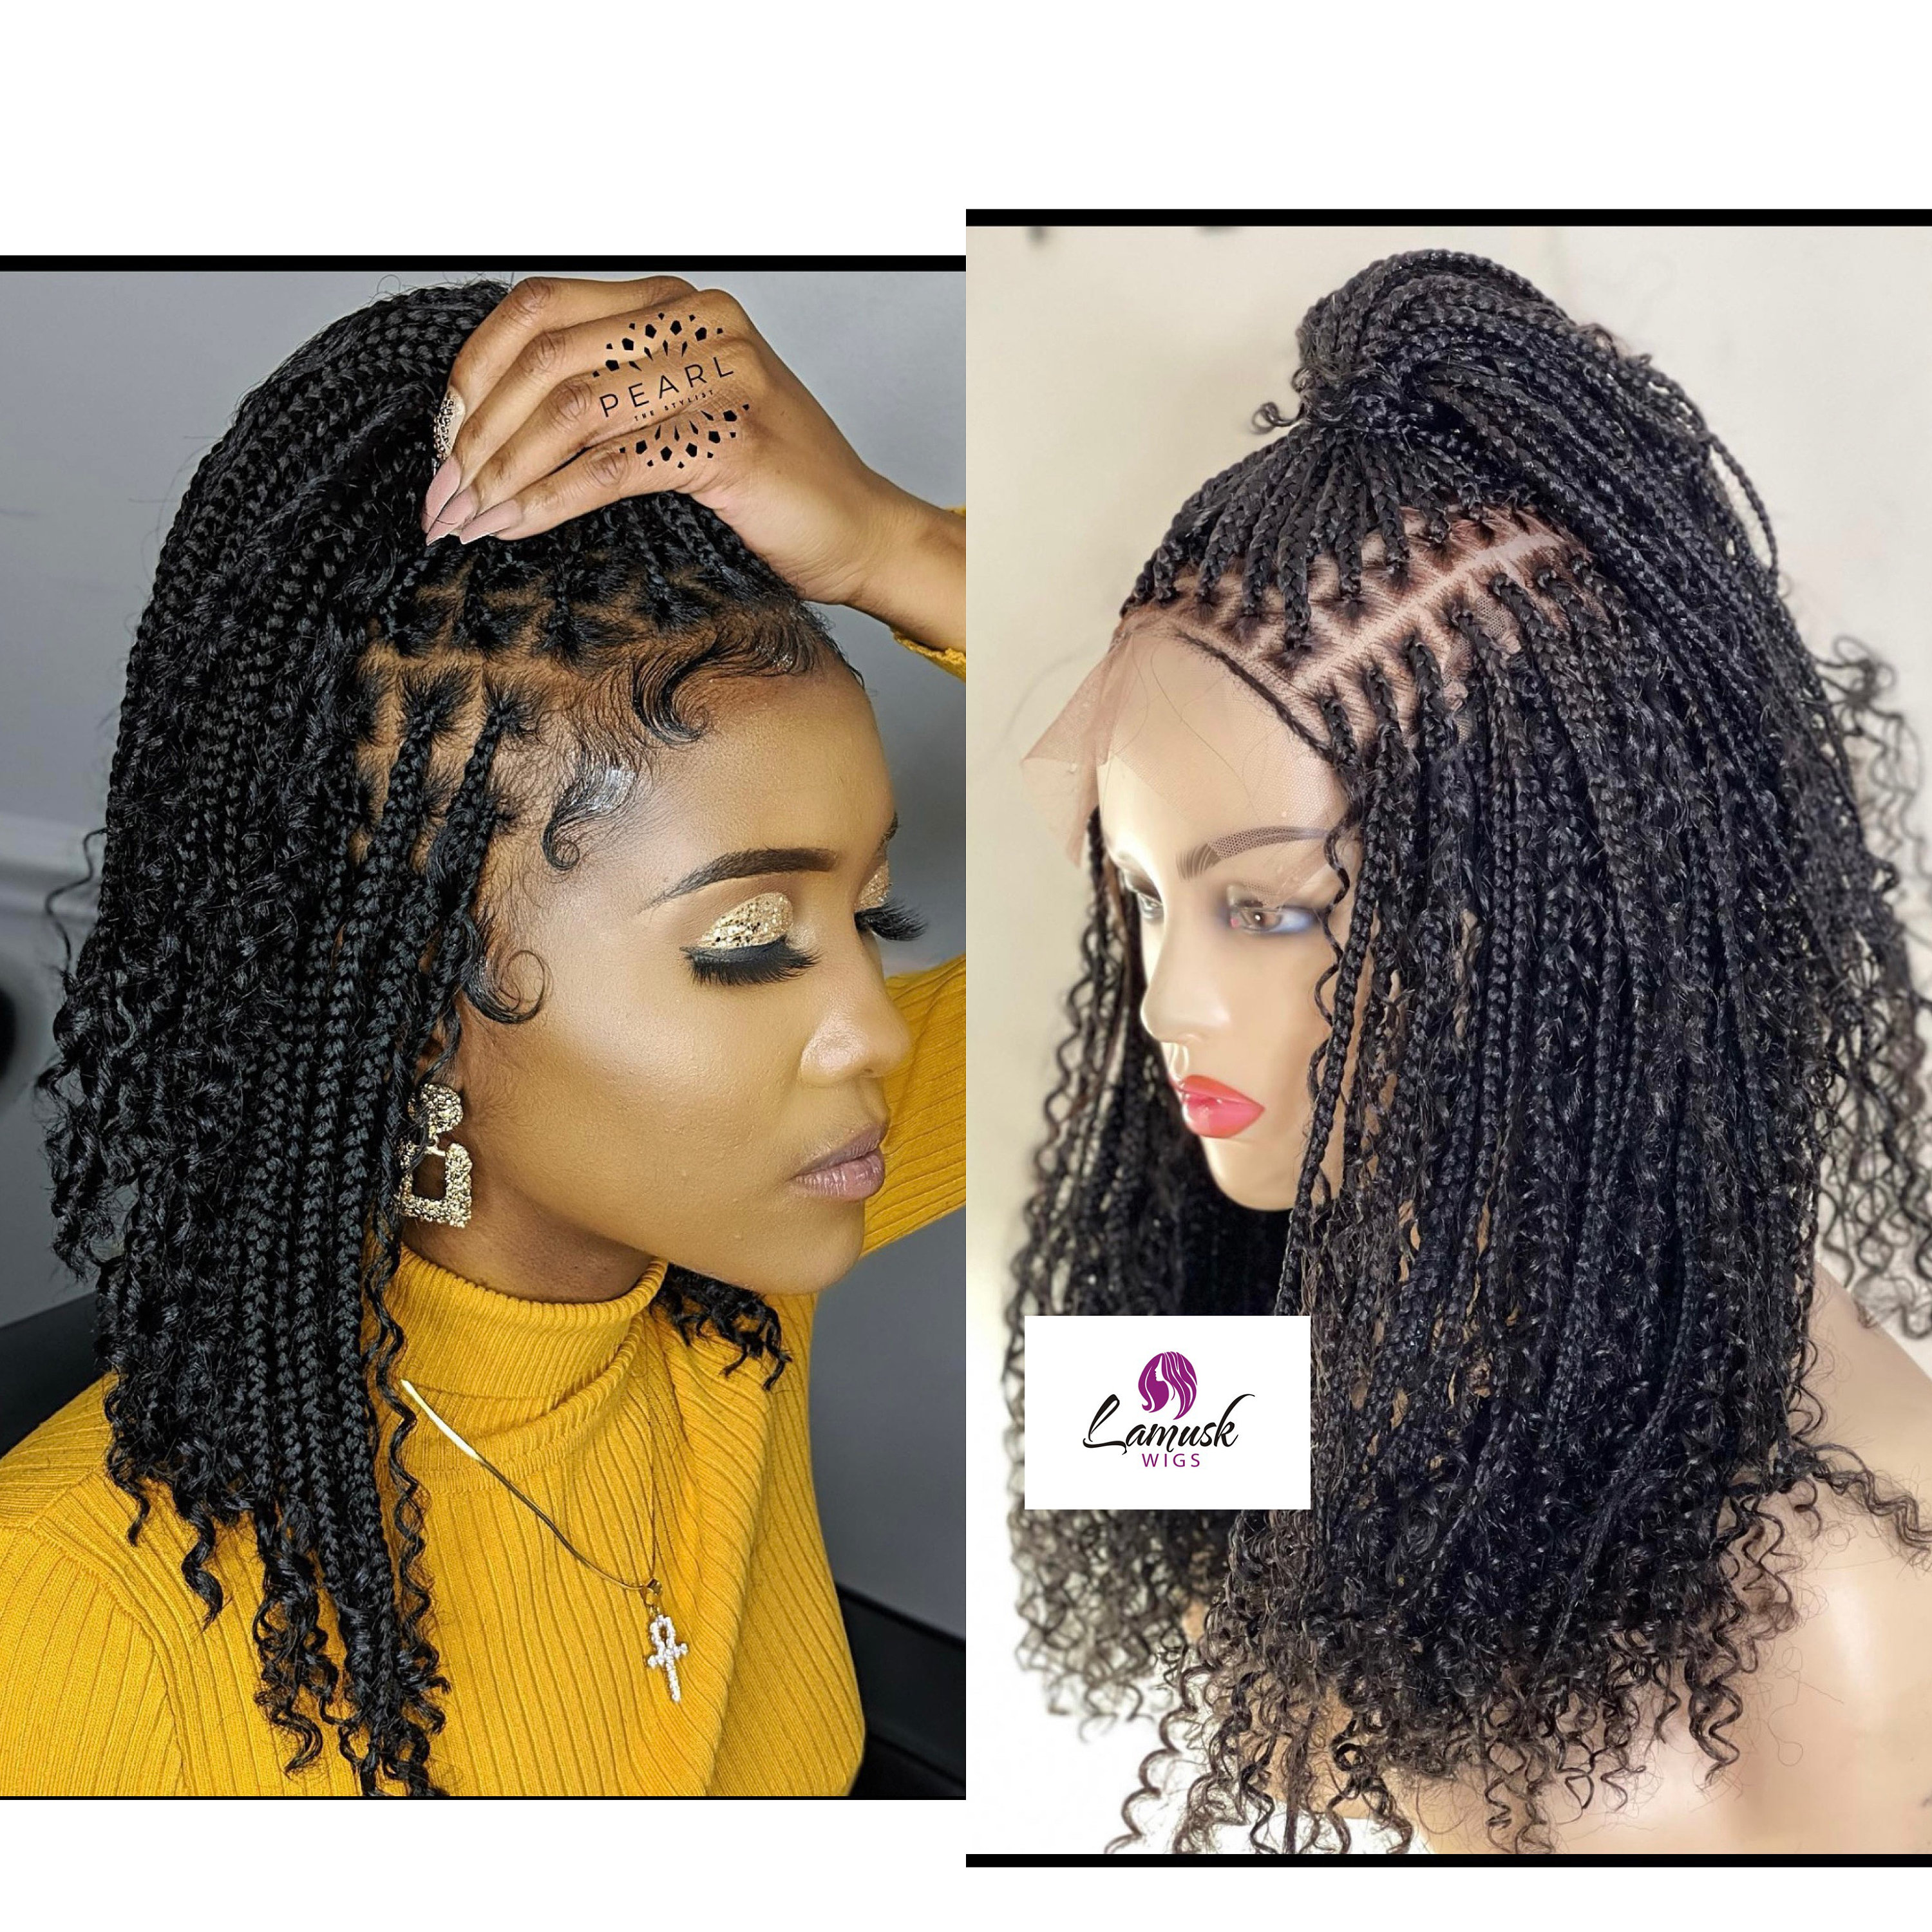 Boho Box Braids On Short 4c Hair  My Improved And Updated Version *It took  3 days to finish* 